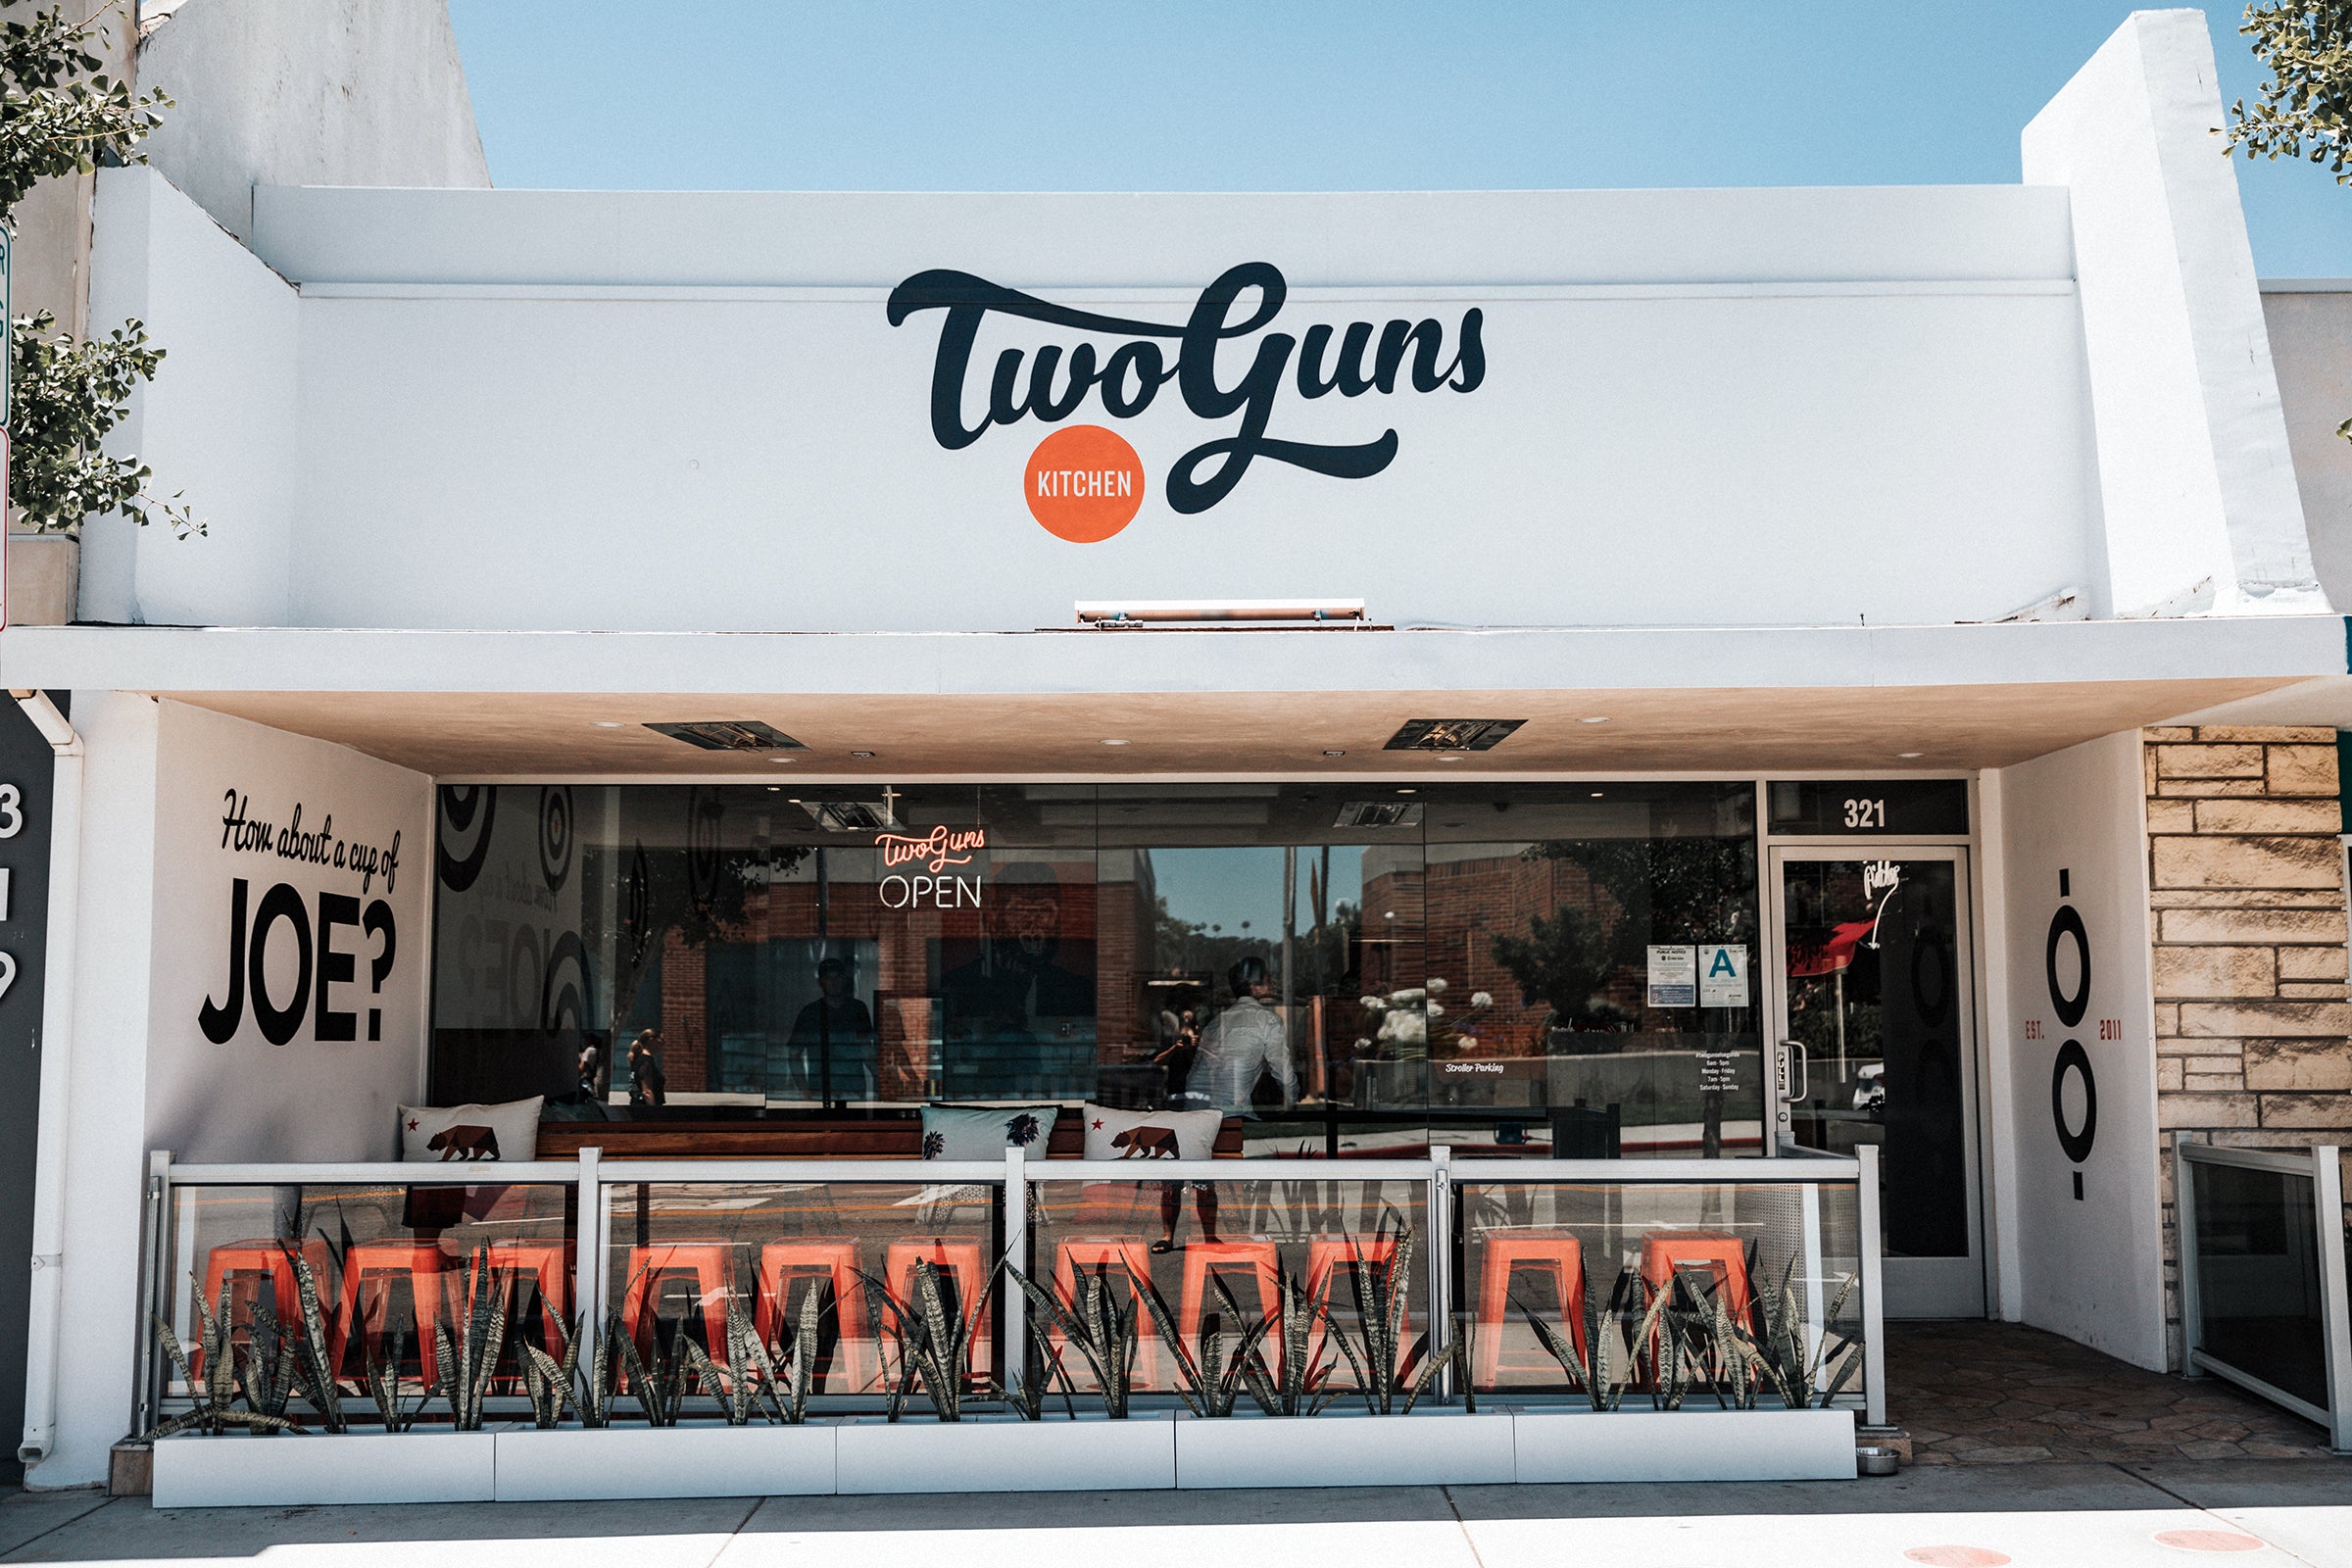 the exterior of two guns el segundo, a white building with a painted sign and outdoor seating